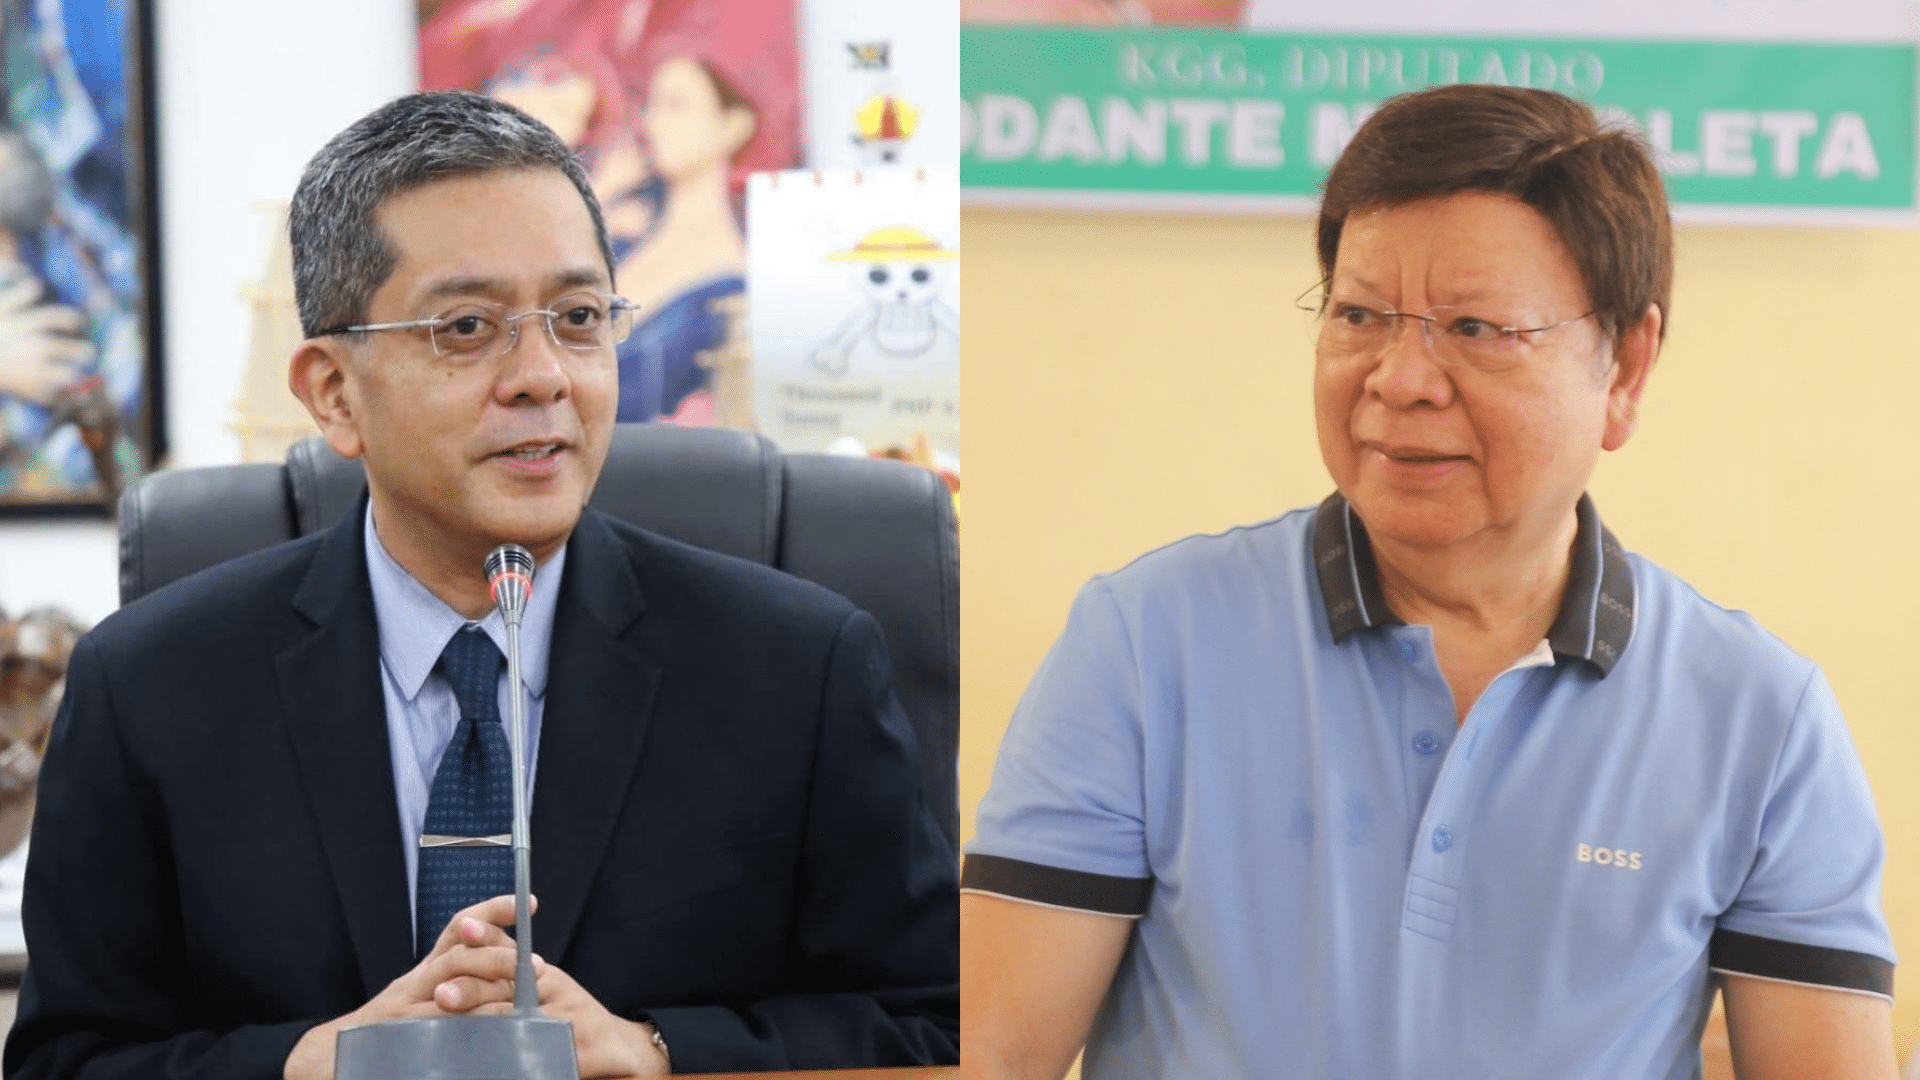 Commission on Elections (Comelec) Chairperson George Garcia has spotted several potential holes in Sagip party-list Rep. Rodante Marcoleta’s claims that he owns offshore bank accounts, noting that he replicated the bank transfers and sent them to “Batman.”